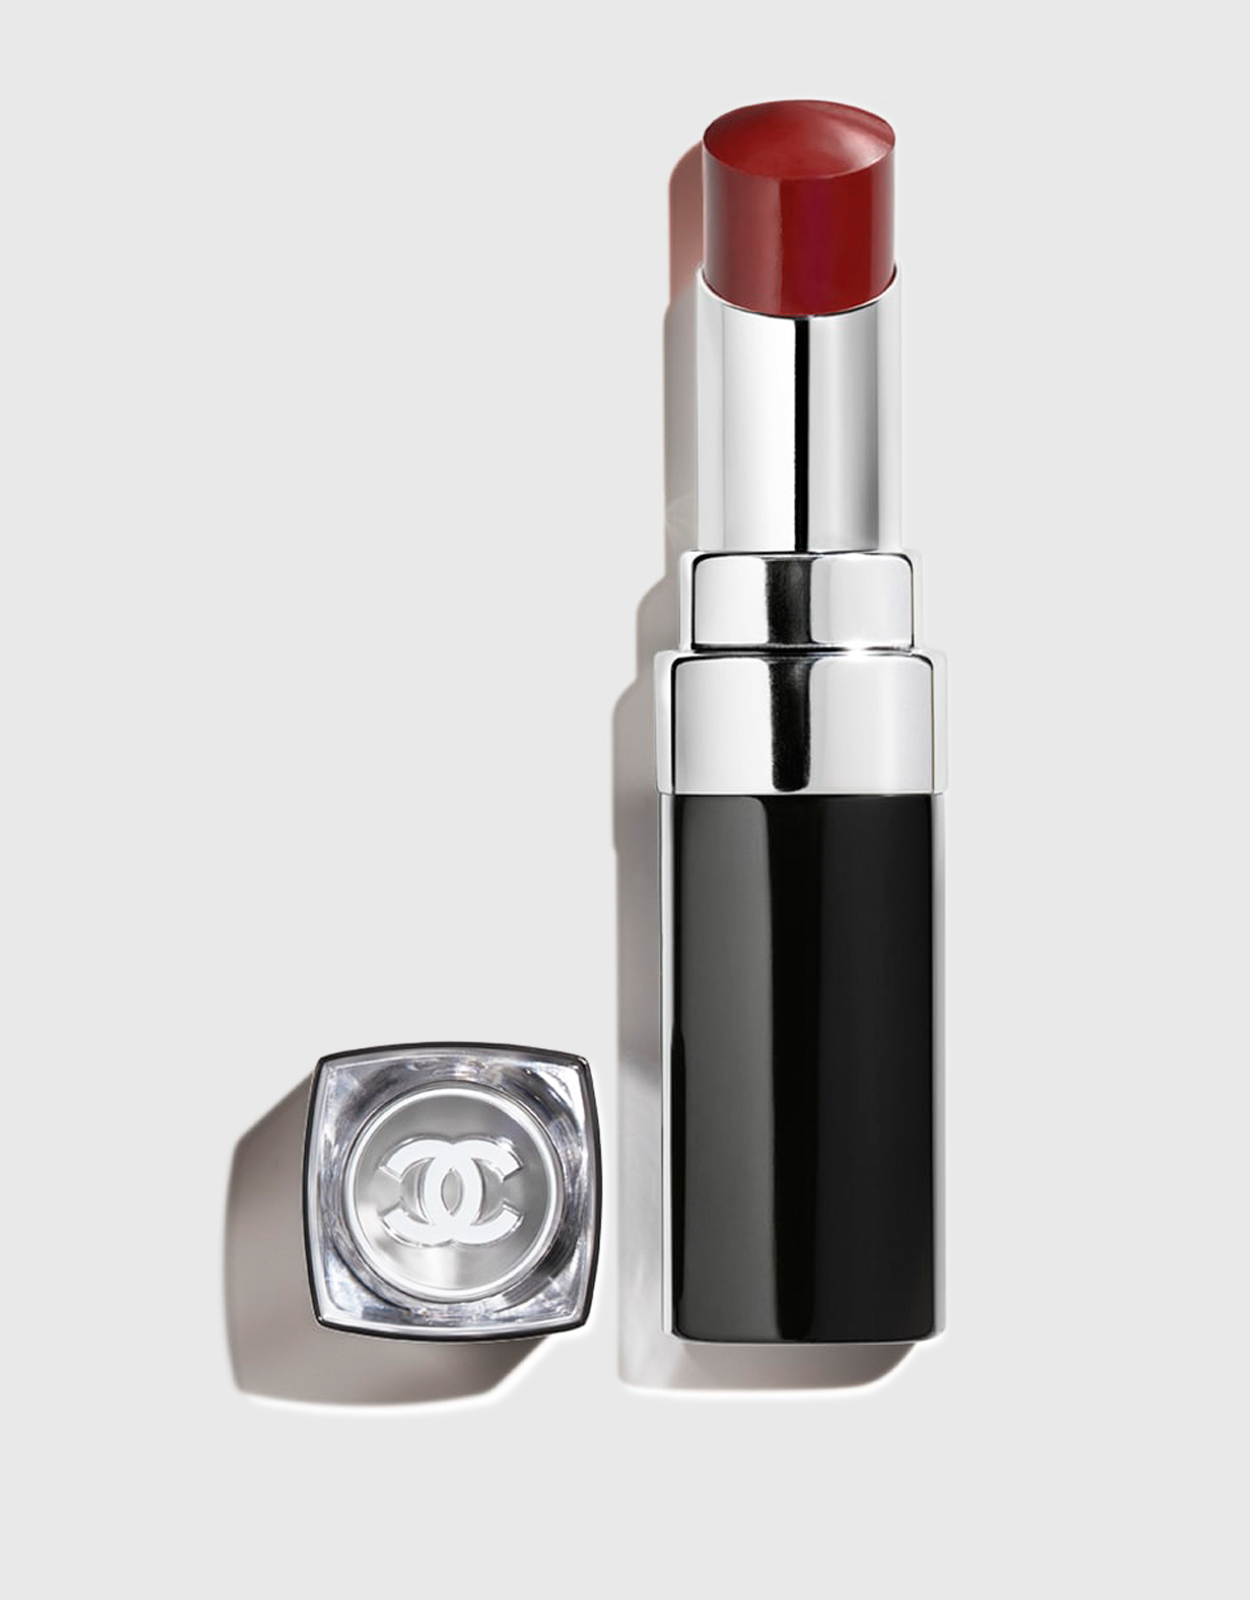 CHANEL, Makeup, Chanel Coco Bloom Hydrating Plumping Shine Lipstick 42  Burst Nwt